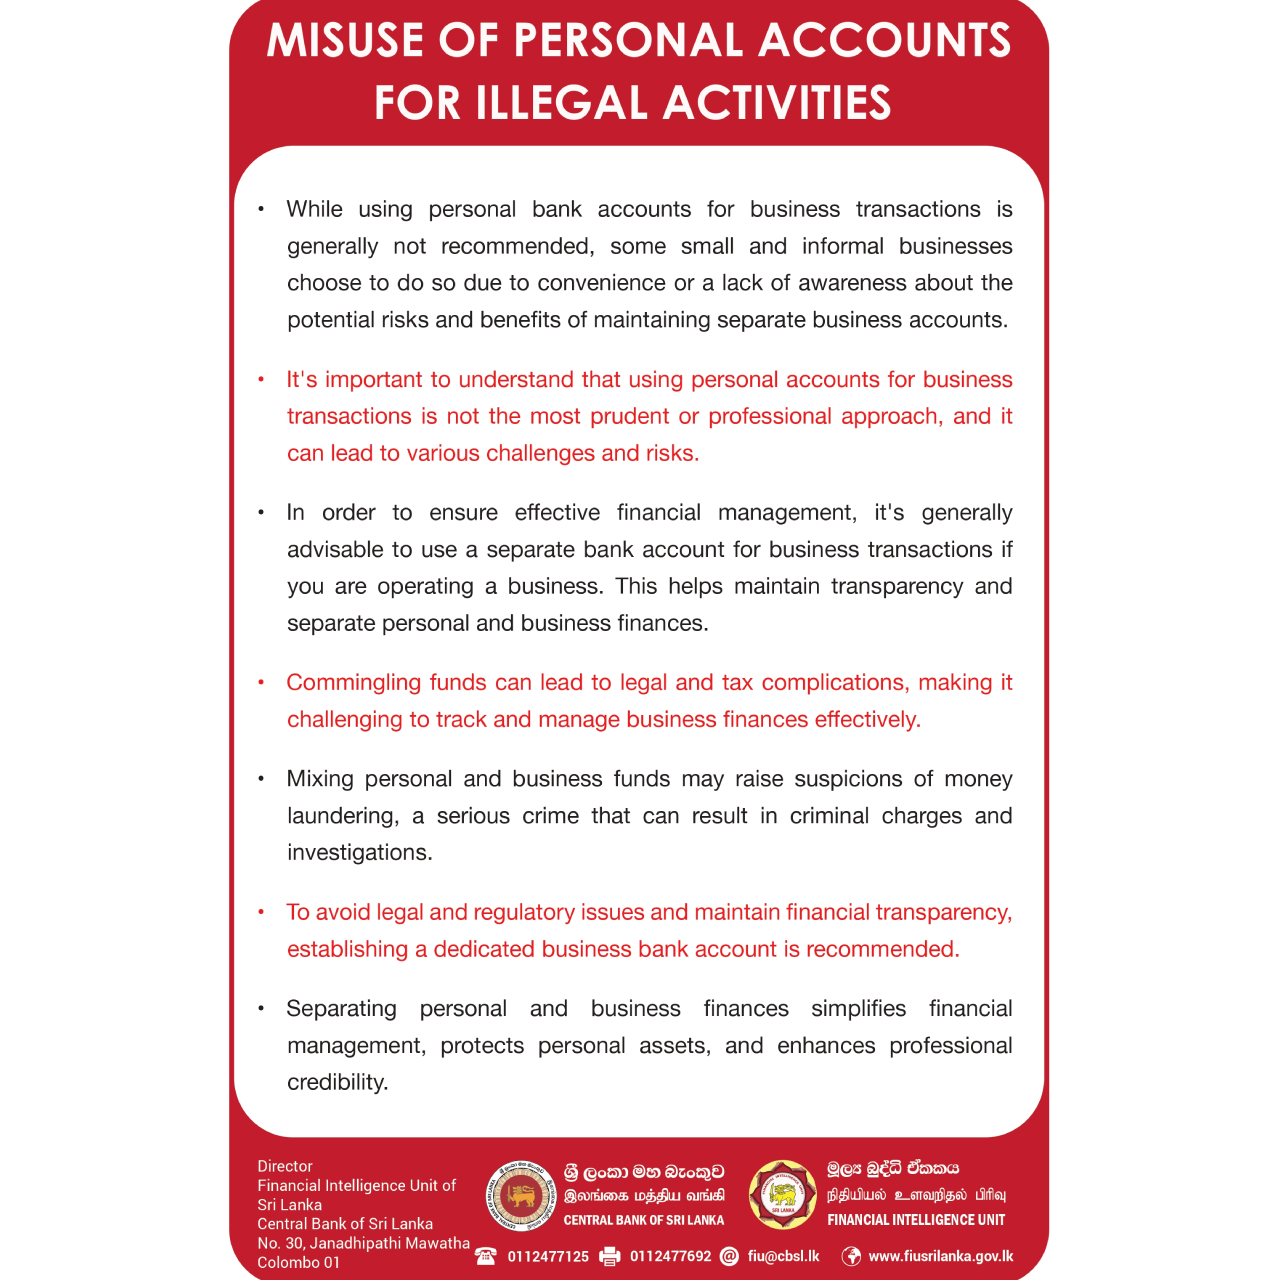 Misuse of Personal Accounts for Illegal Activities